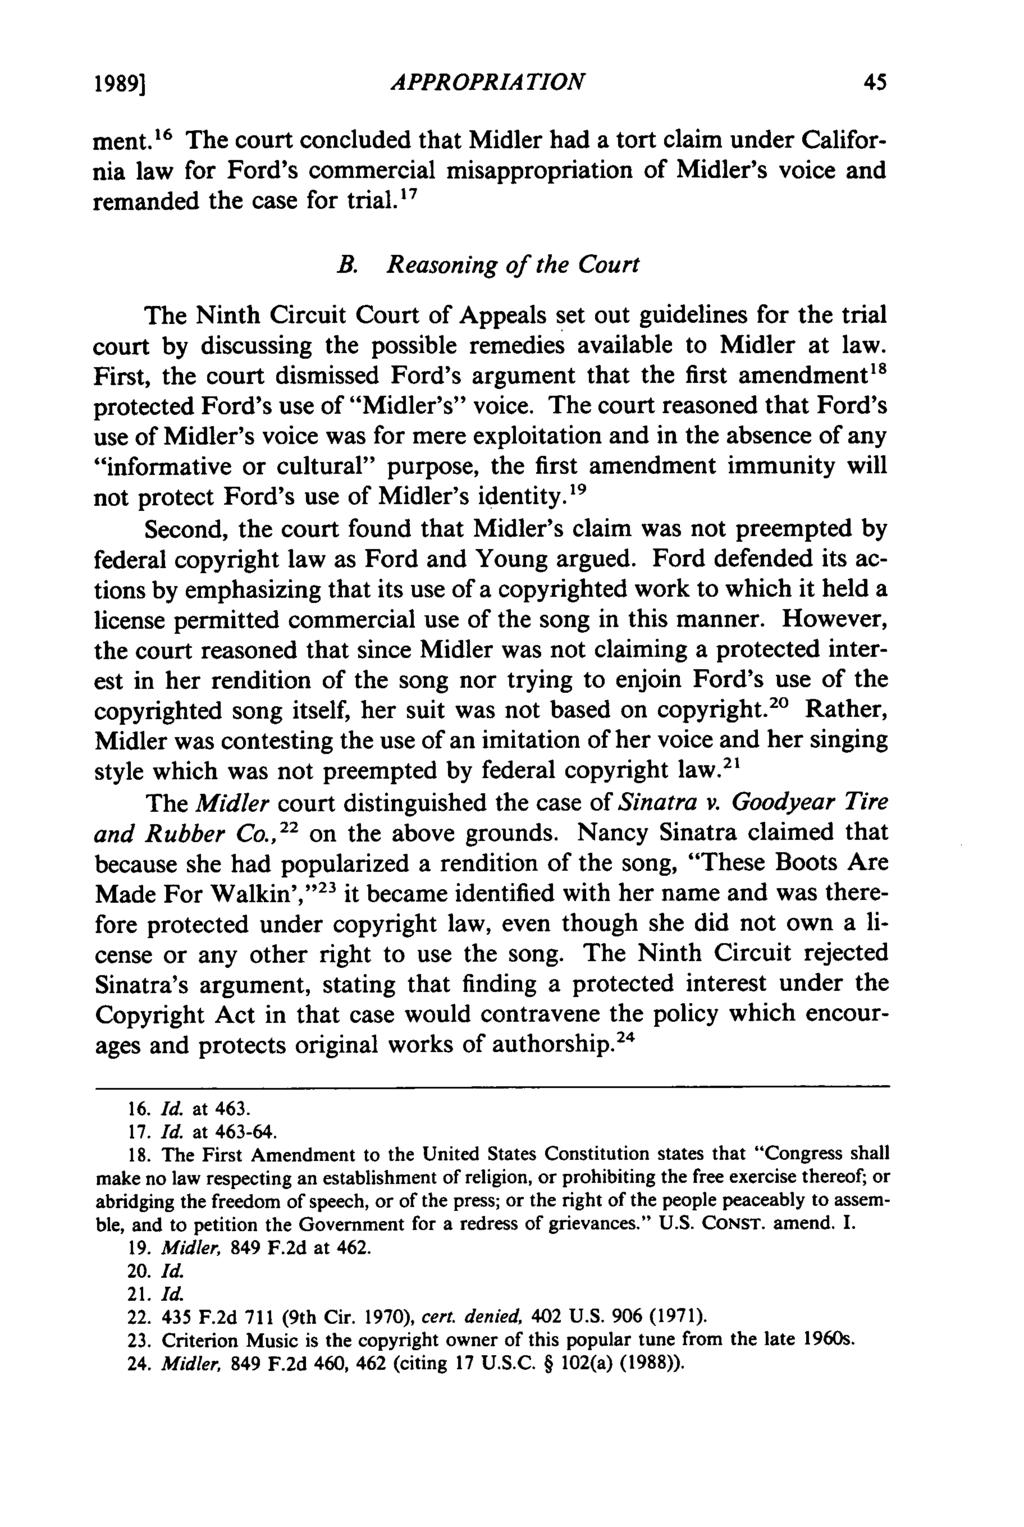 1989] APPROPRIATION ment.' 6 The court concluded that Midler had a tort claim under California law for Ford's commercial misappropriation of Midler's voice and remanded the case for trial.17 B.